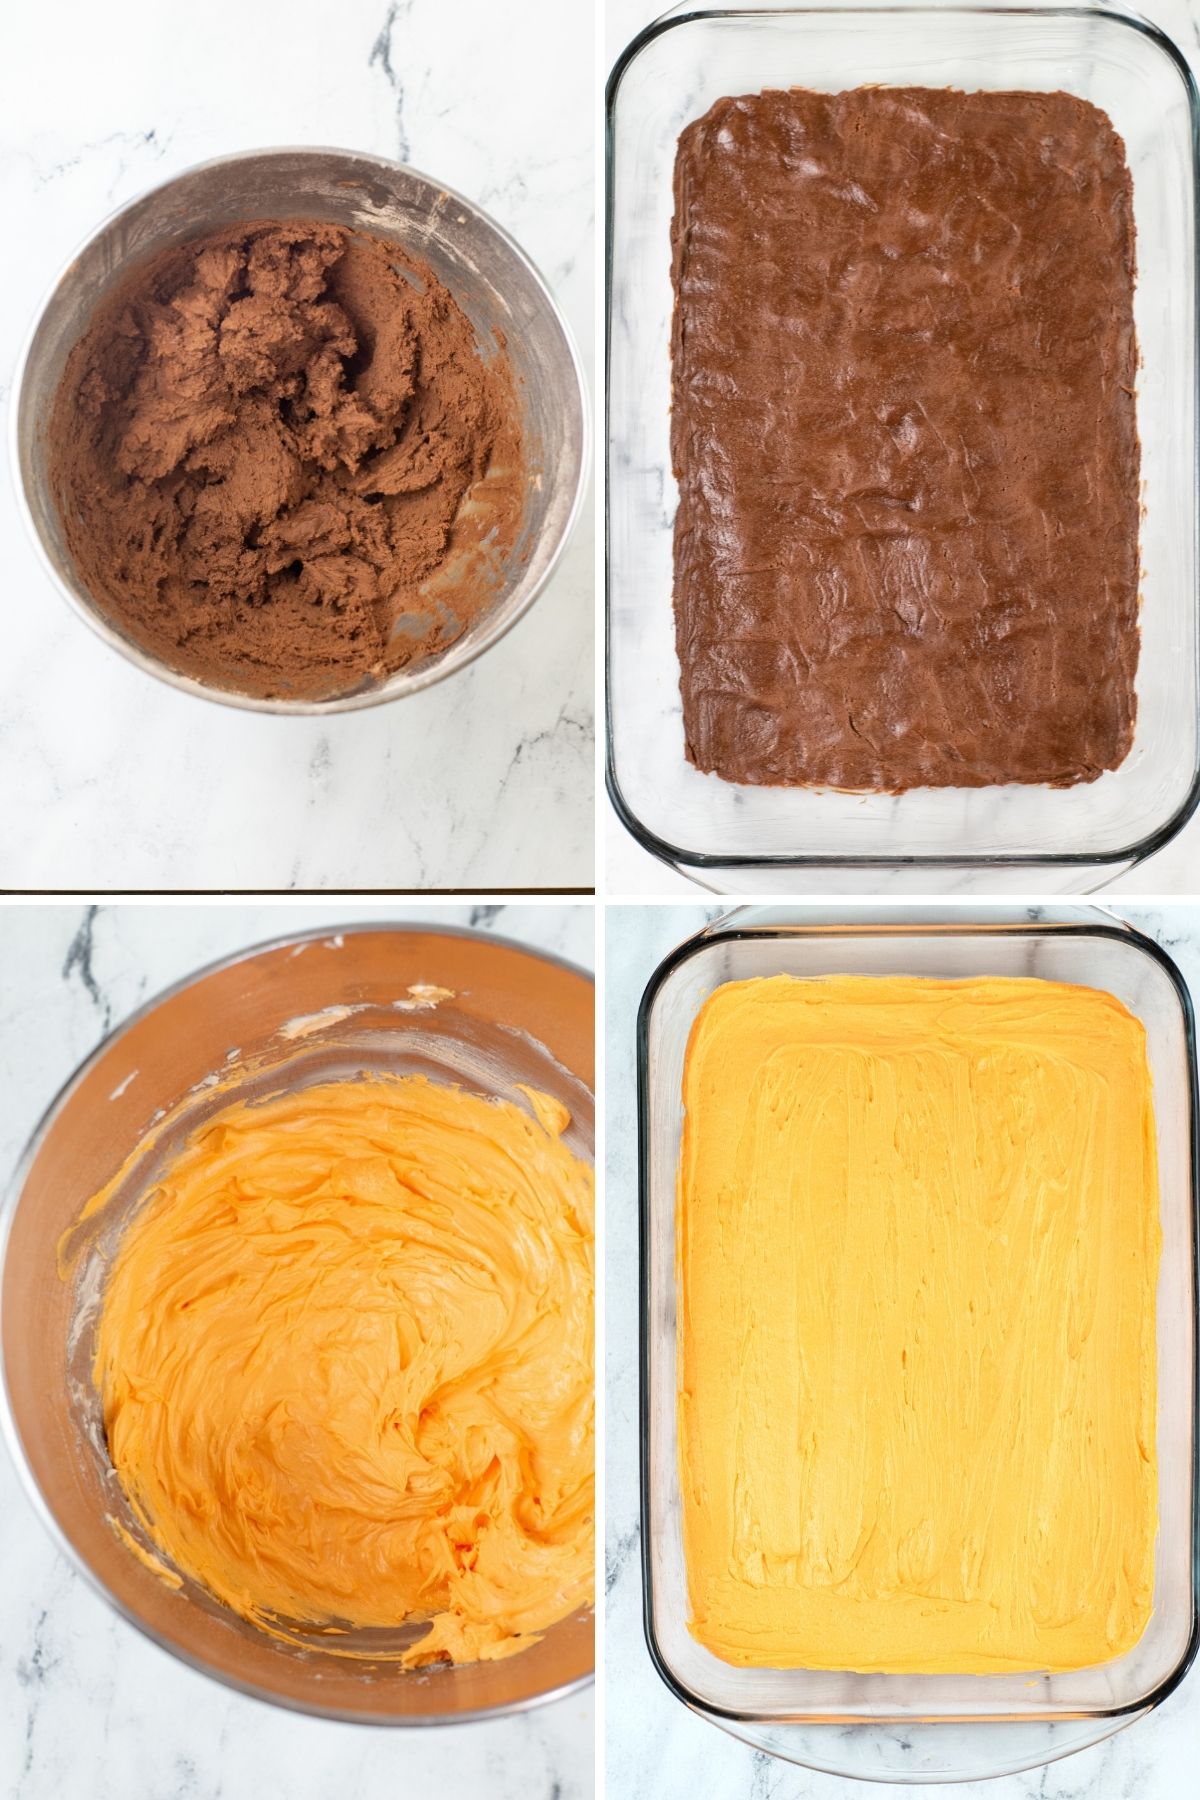 how to make steps: cookie ingredients mixed in metal bowl: baked in a clear 9x13 pan: orange buttercream mixed in metal bowl, spread on top of cookie in clear baking dish